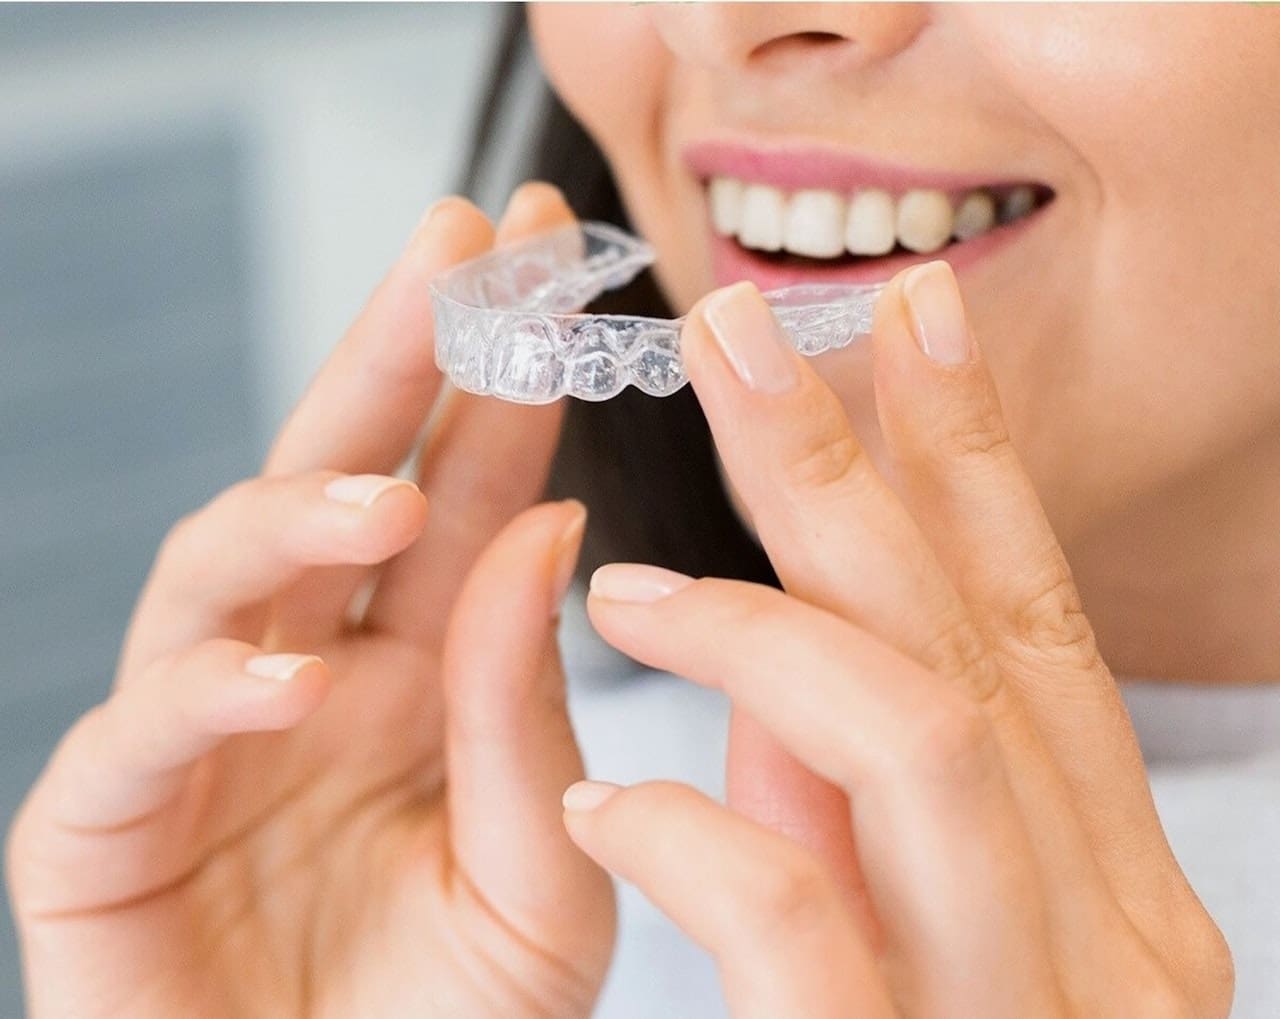 Smiling woman looking happy while applying Invisalign aligners on her teeth.